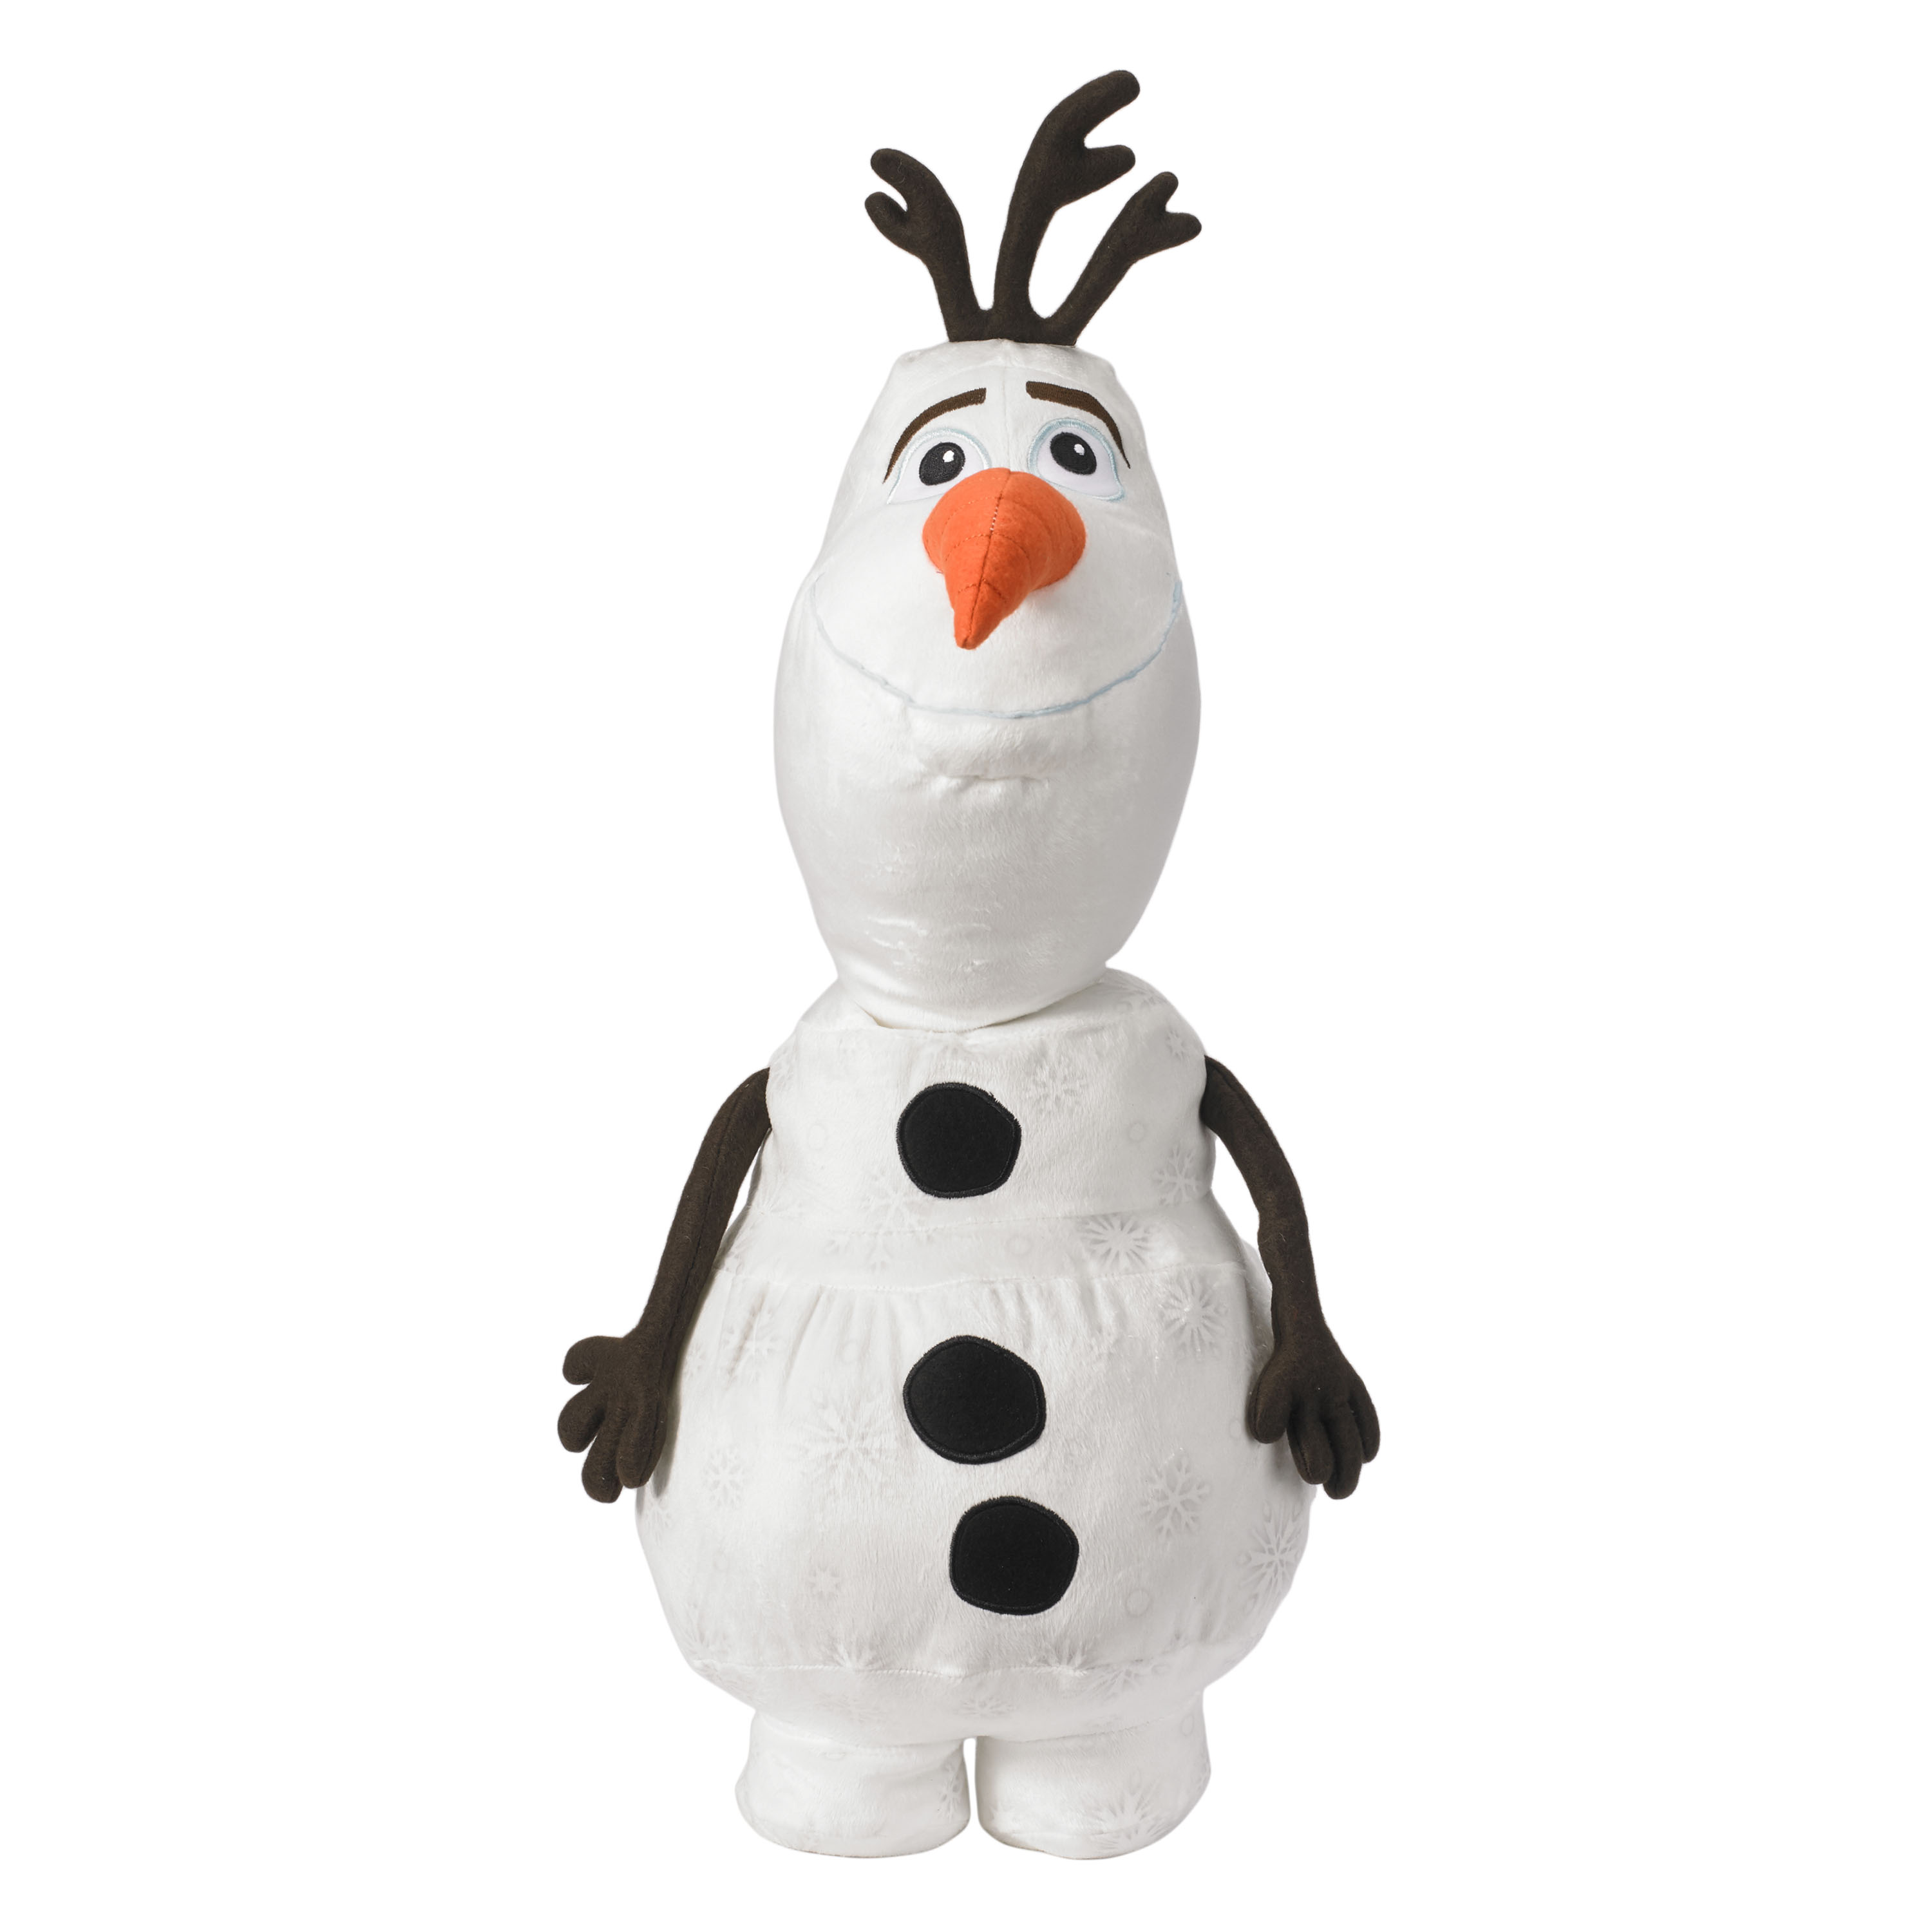 Disney Frozen Kids Olaf Bedding Plush Cuddle and Decorative Pillow Buddy, White - image 1 of 7